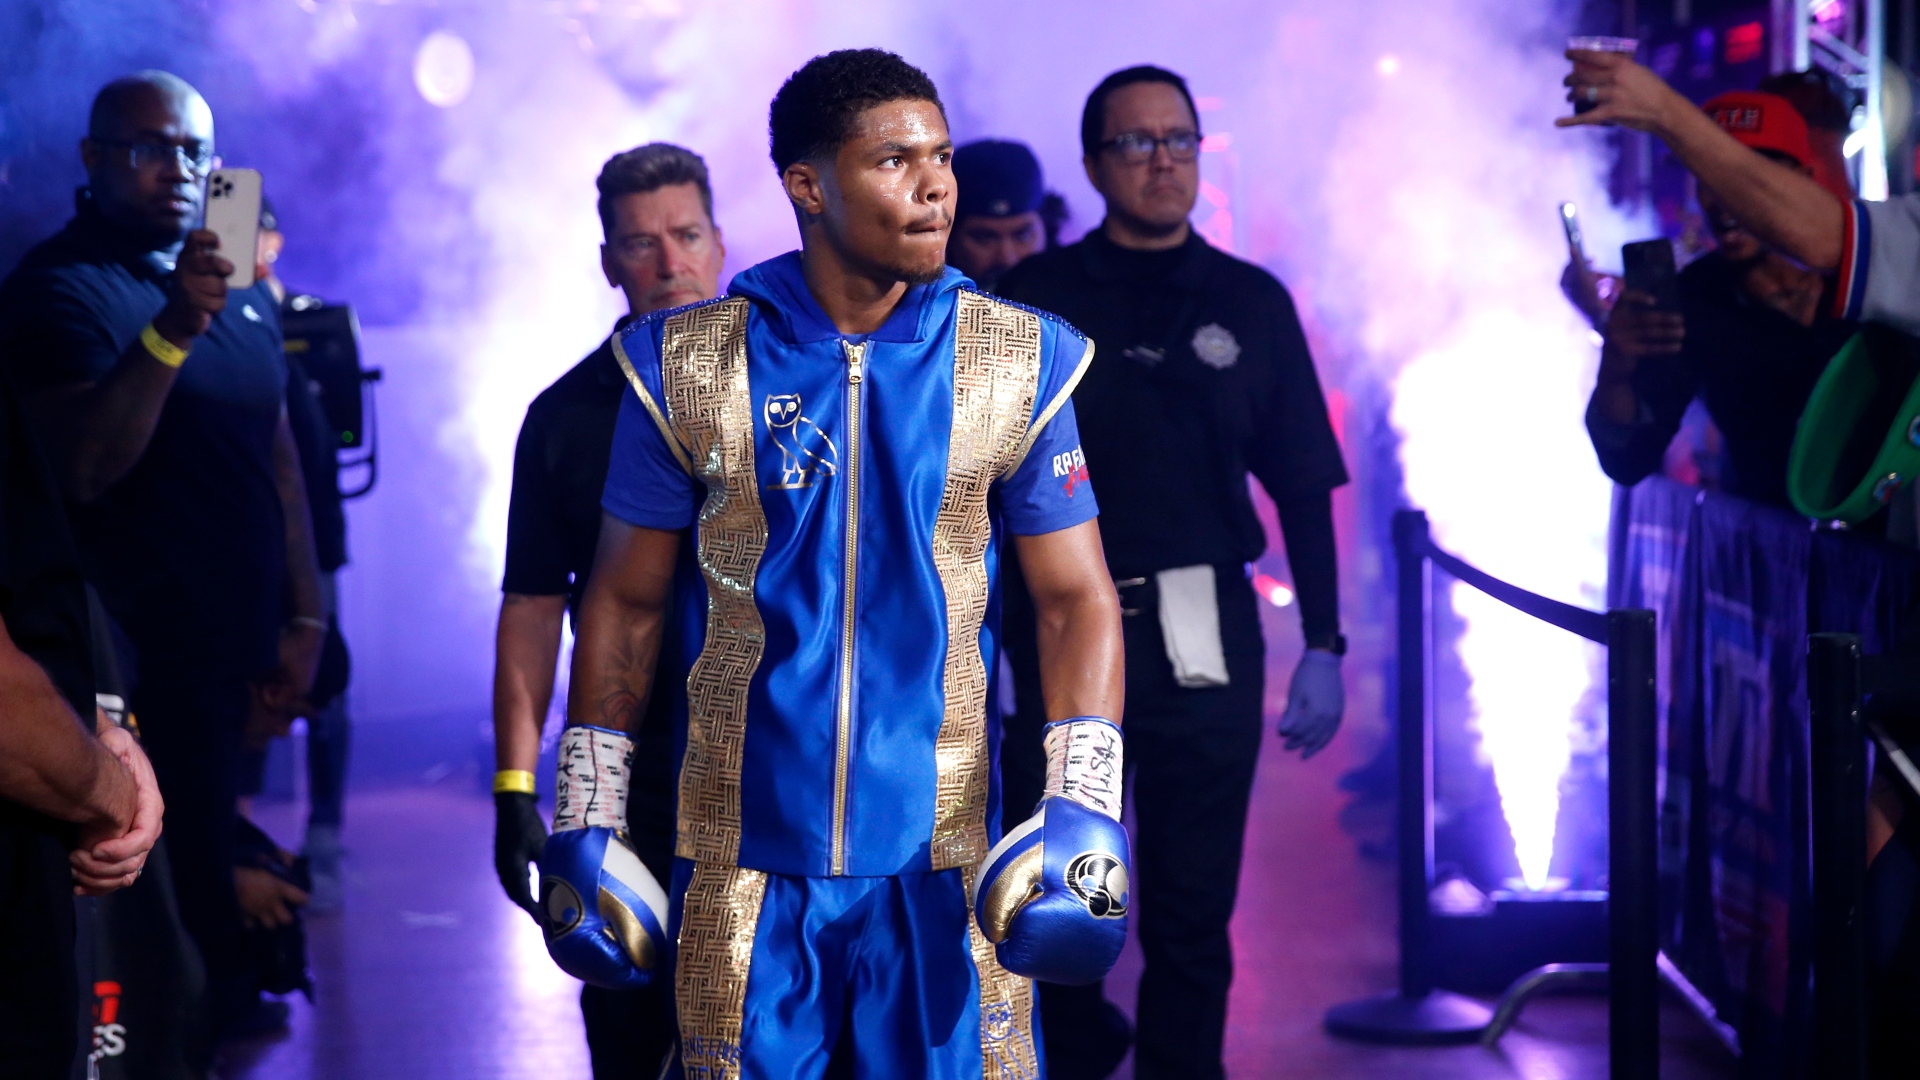 Here's how Shakur Stevenson reacted to William Zepeda's call out